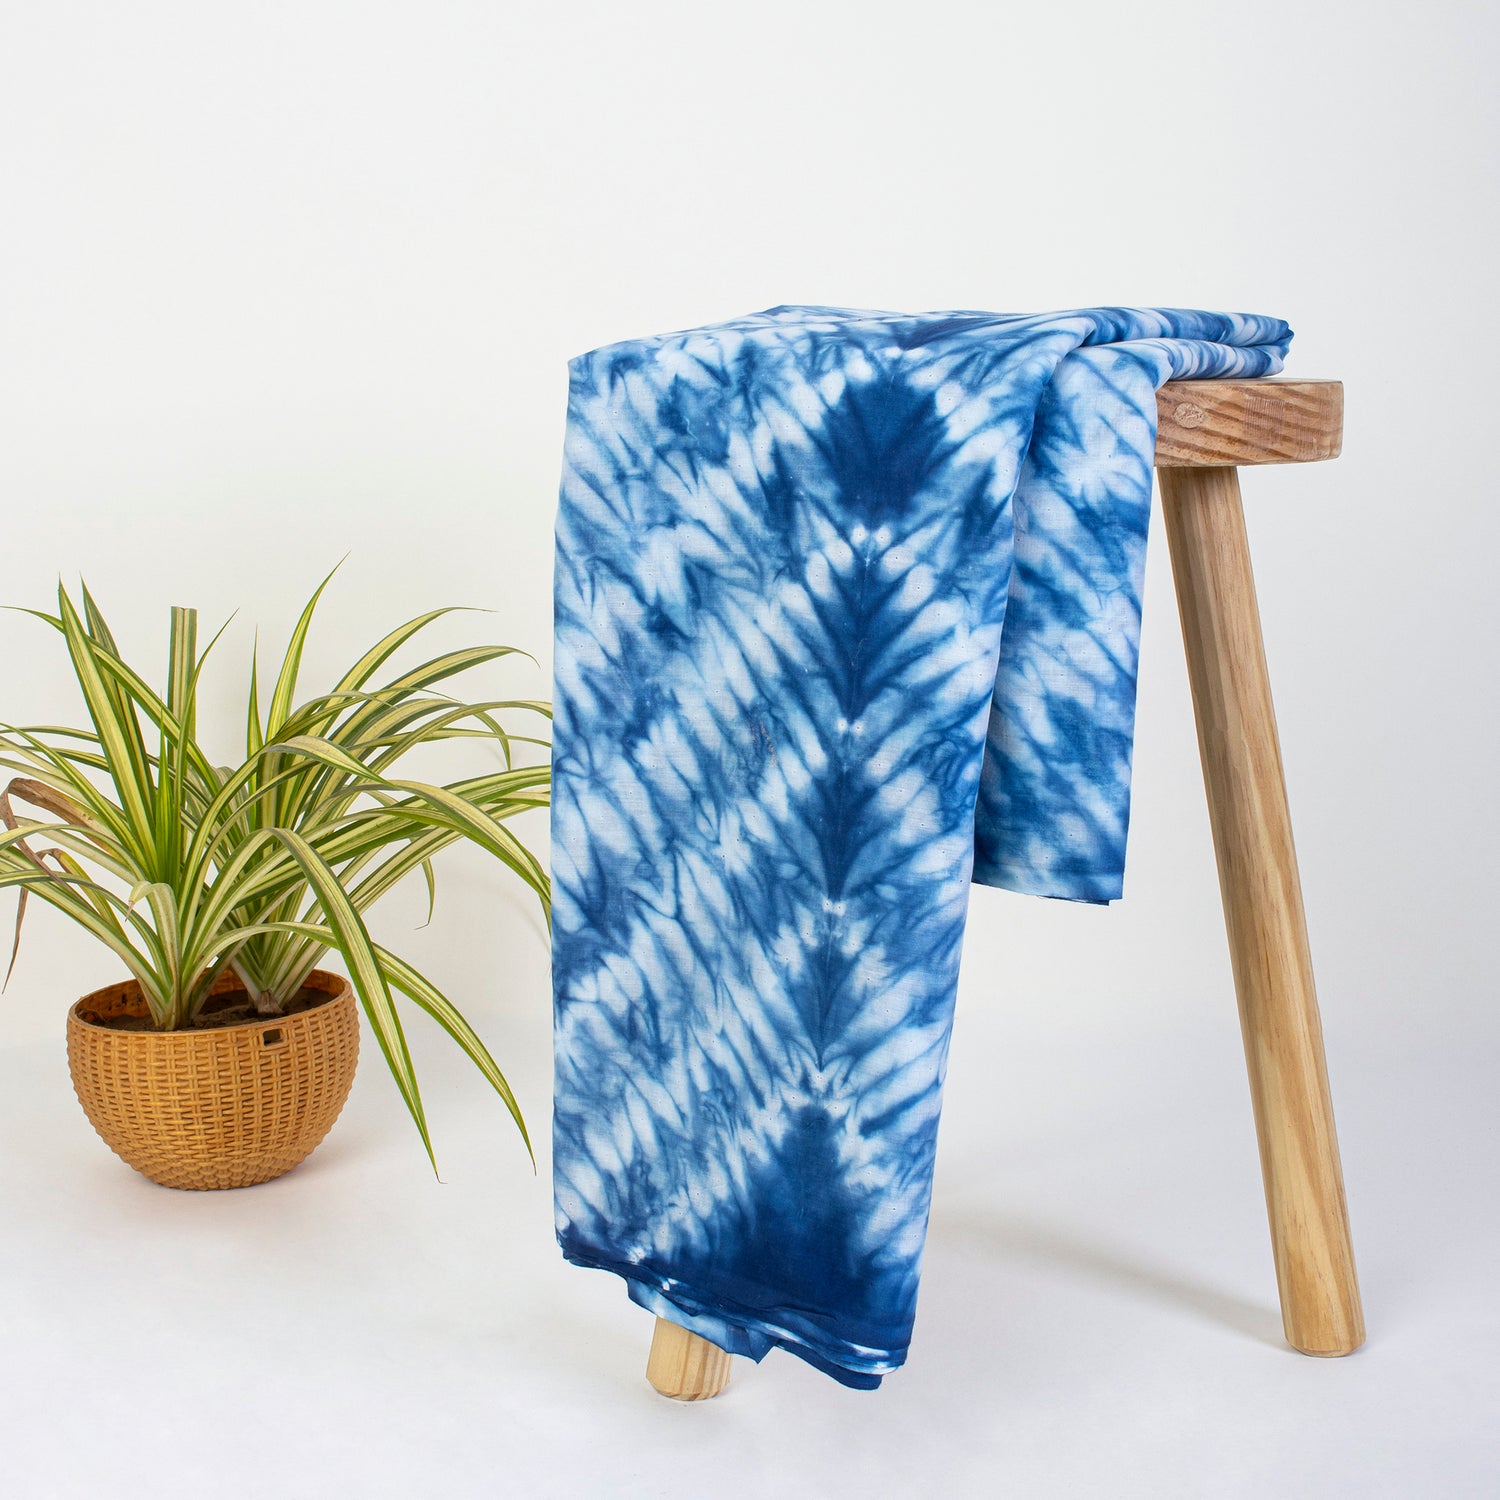 Hand Dyed Cotton Fabric Misty Waters Tie Dye